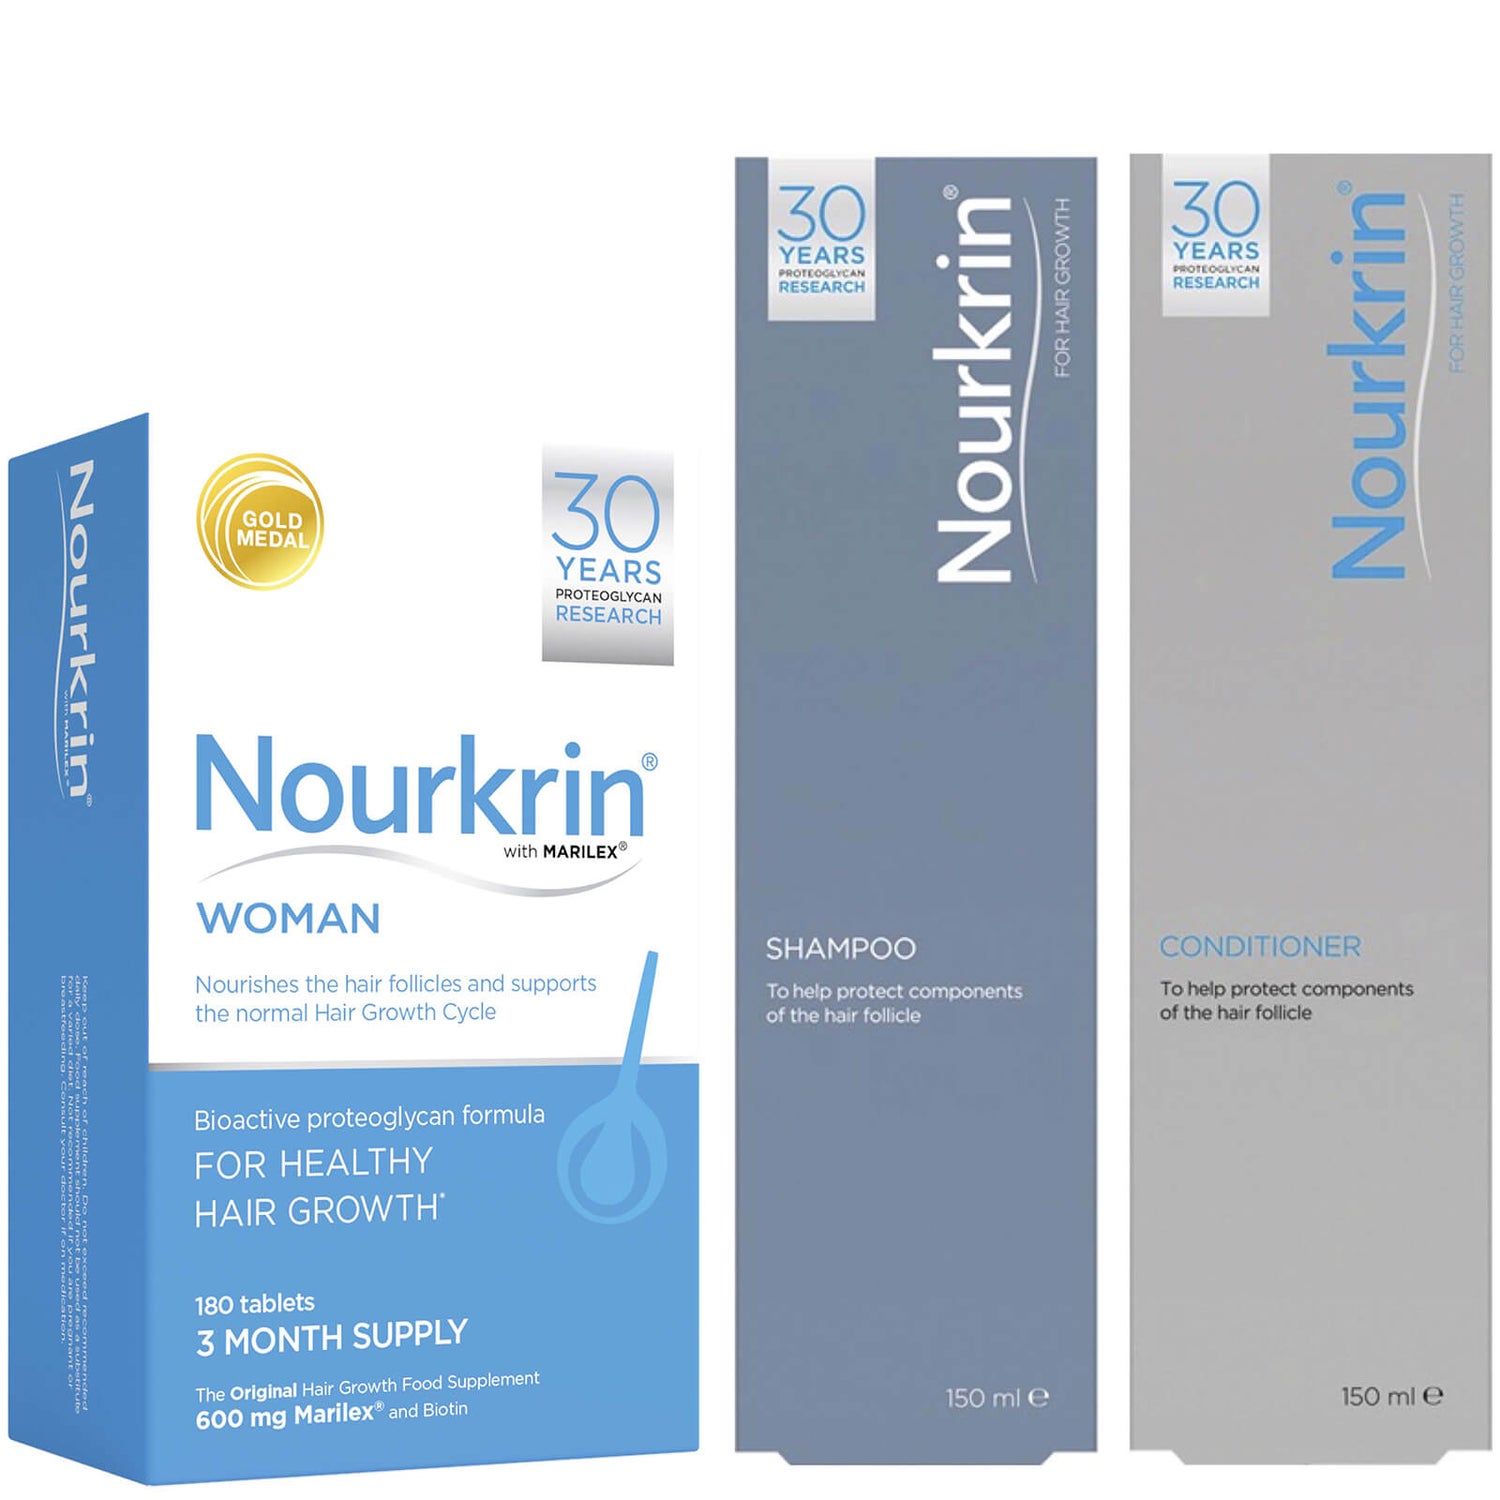 Nourkrin Woman Value Pack - Contains 180 Tablets Plus Shampoo and Conditioner (2x150ml)